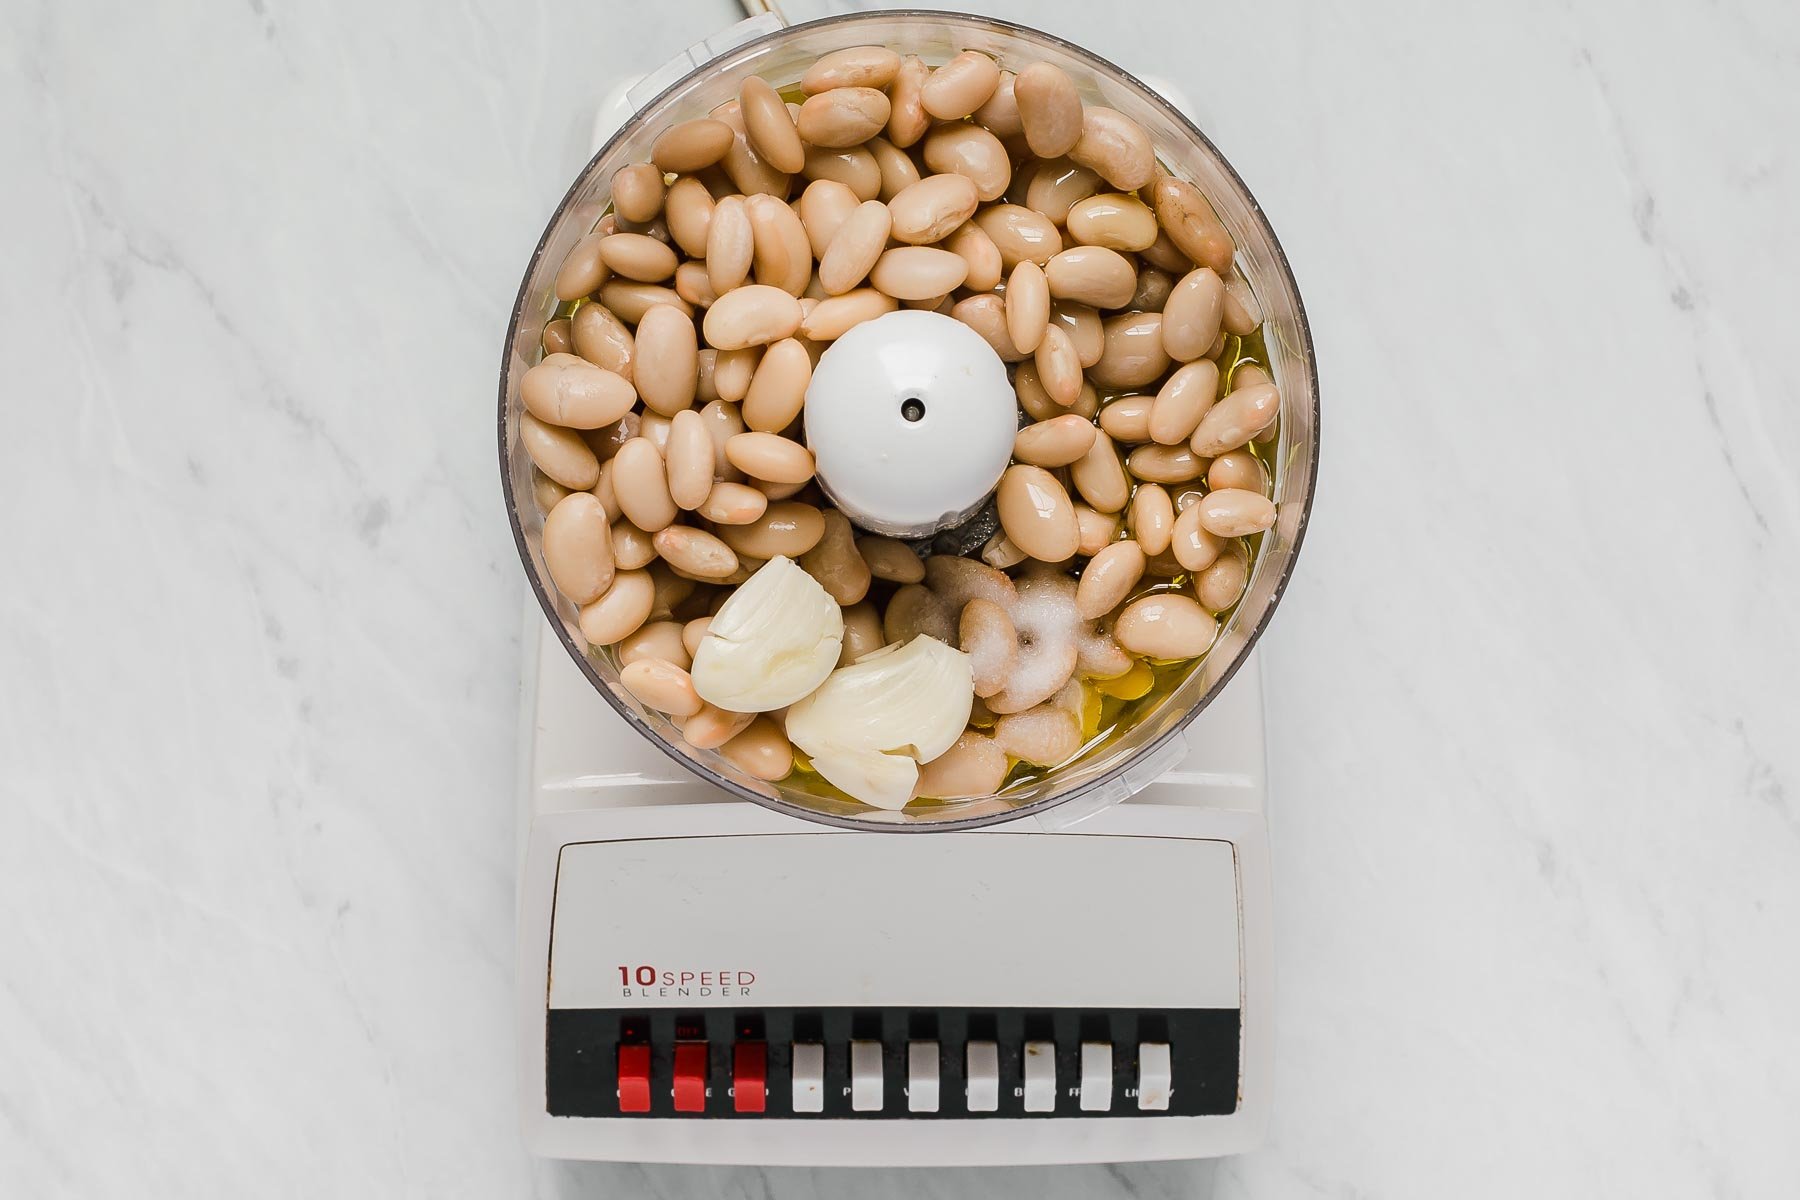 White beans and garlic cloves in the bowl of a food processor.